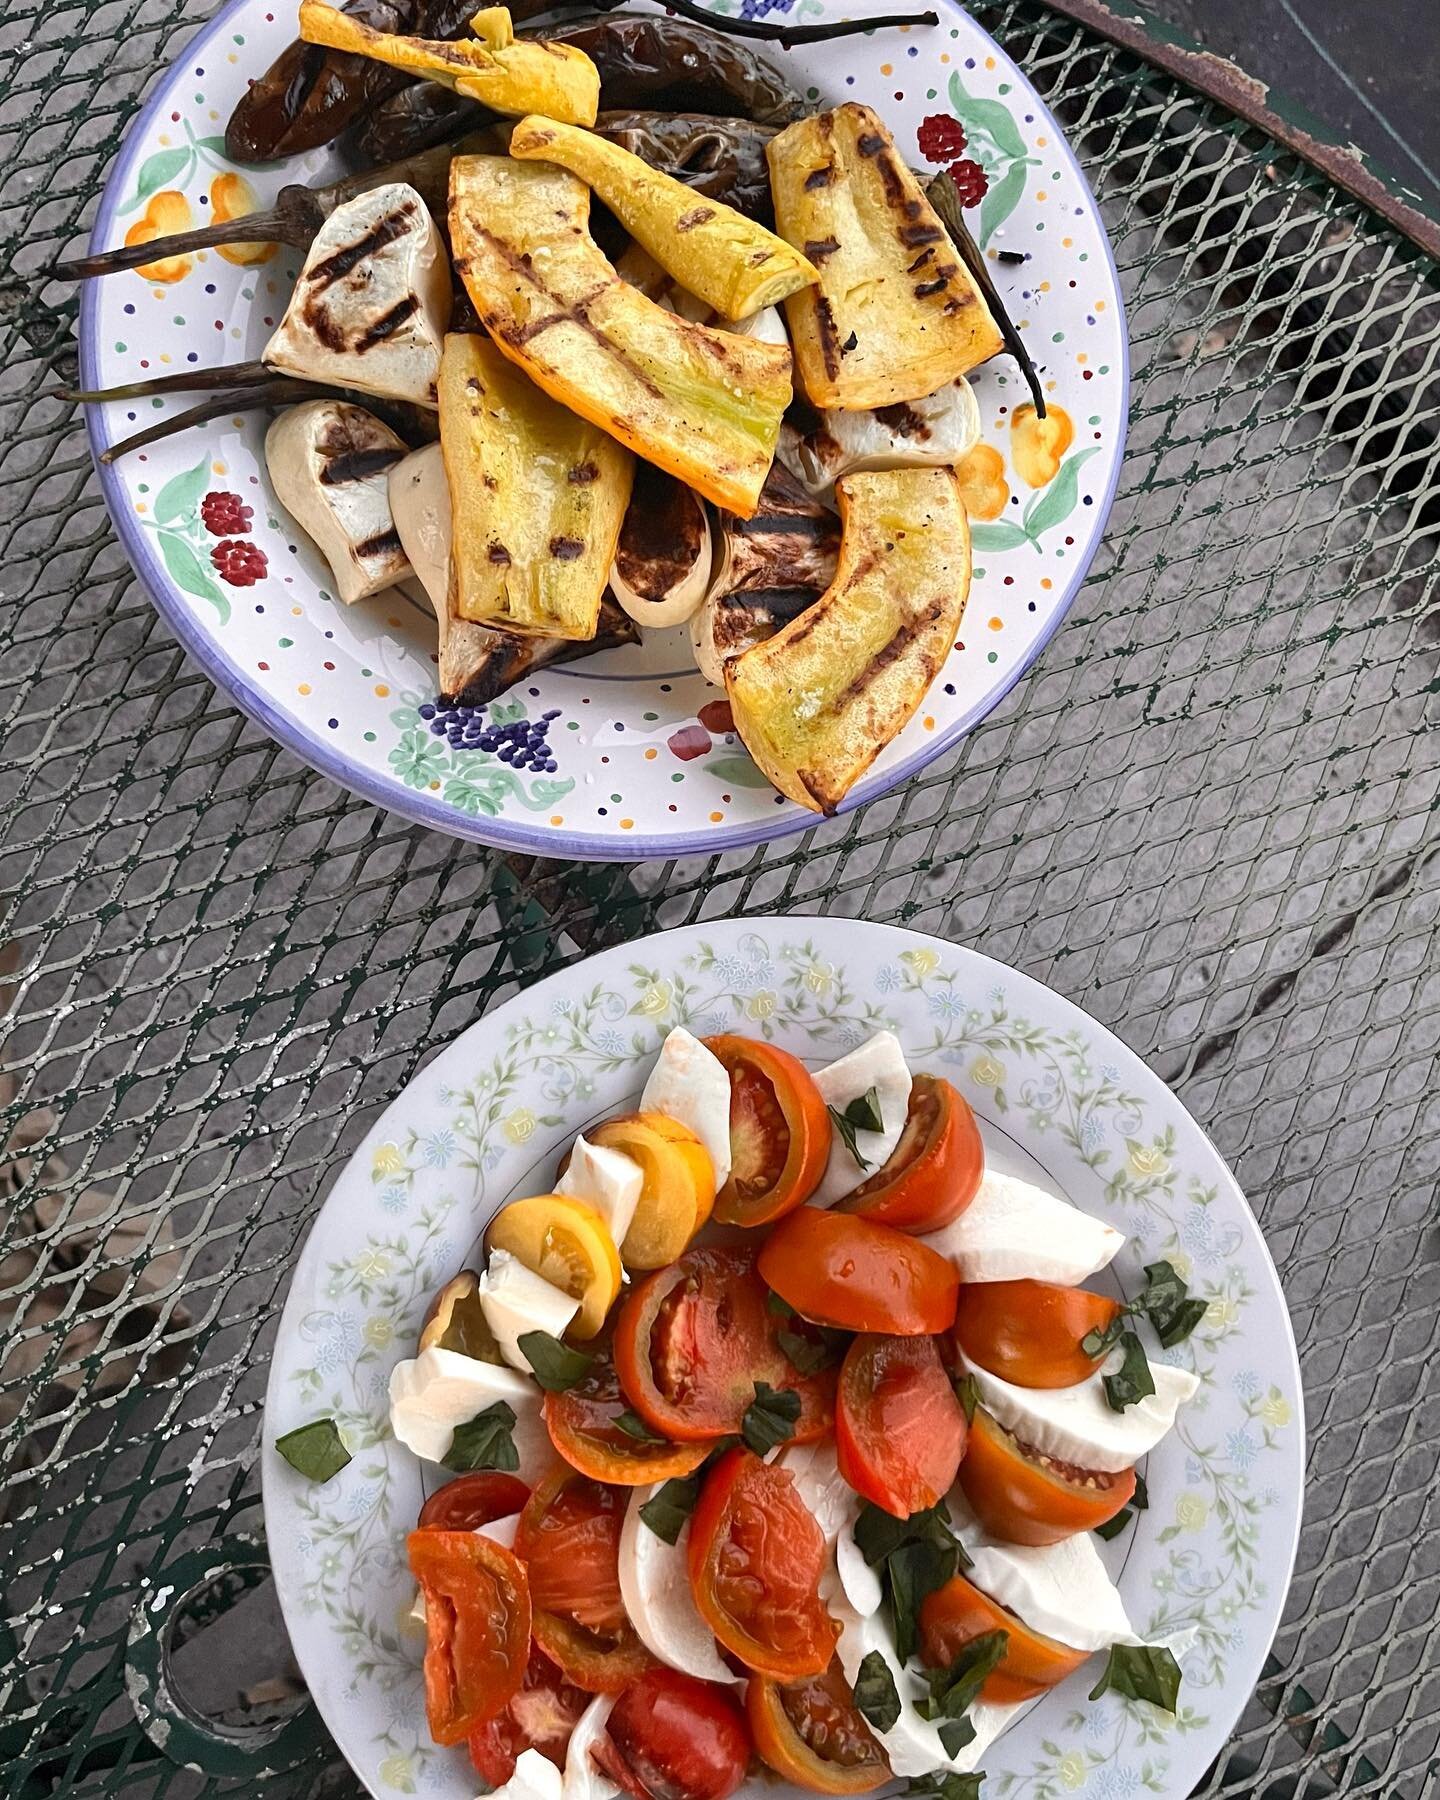 Our weeding wednesday crew harvested a farm fresh dinner last night! We grilled up some Japanese eggplant, yellow squash, and patty pan squash, and prepared a variety of heirloom tomatoes and basil for a snack after an evening of weeding 🌱 See you n